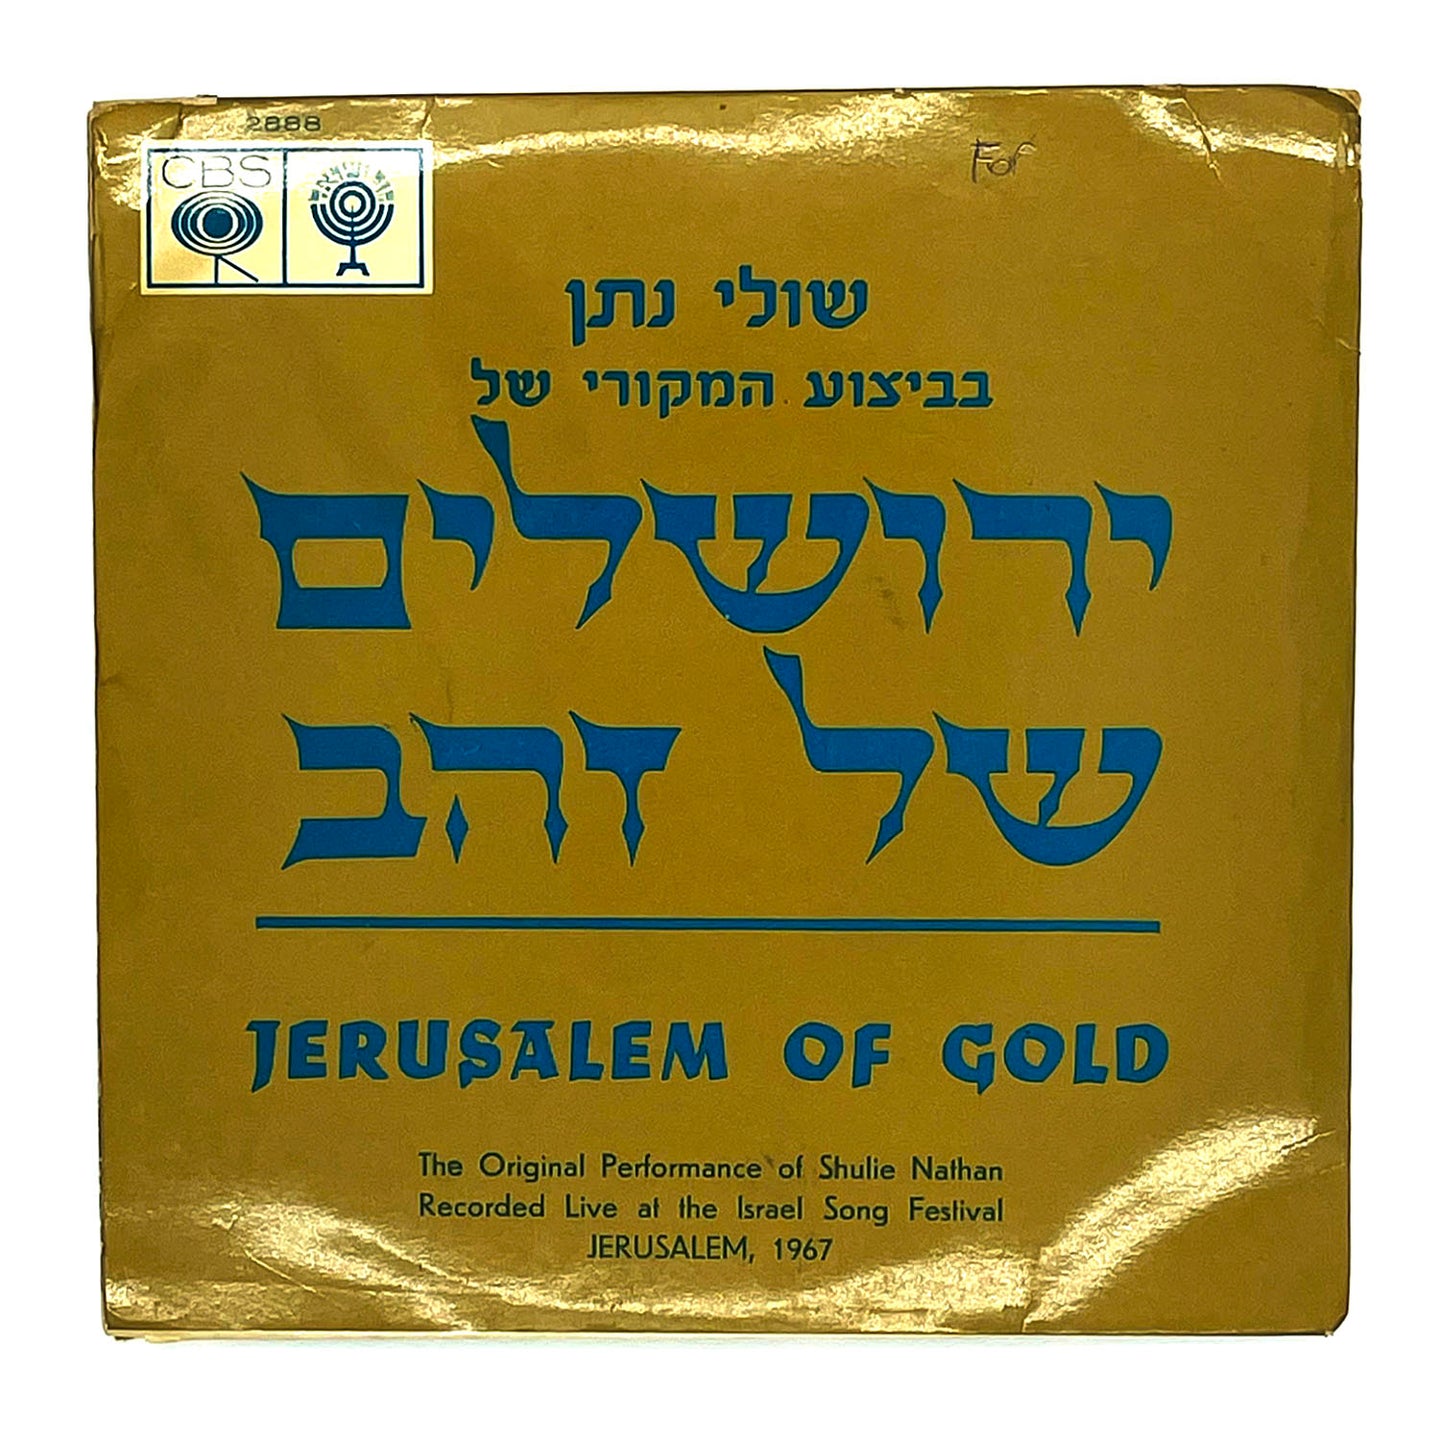 Shulie Hathan : JERUSALEM OF GOLD/ HA' AMEENEE YOM YANO (BELIEVE ME, THE DAY WILL COME)